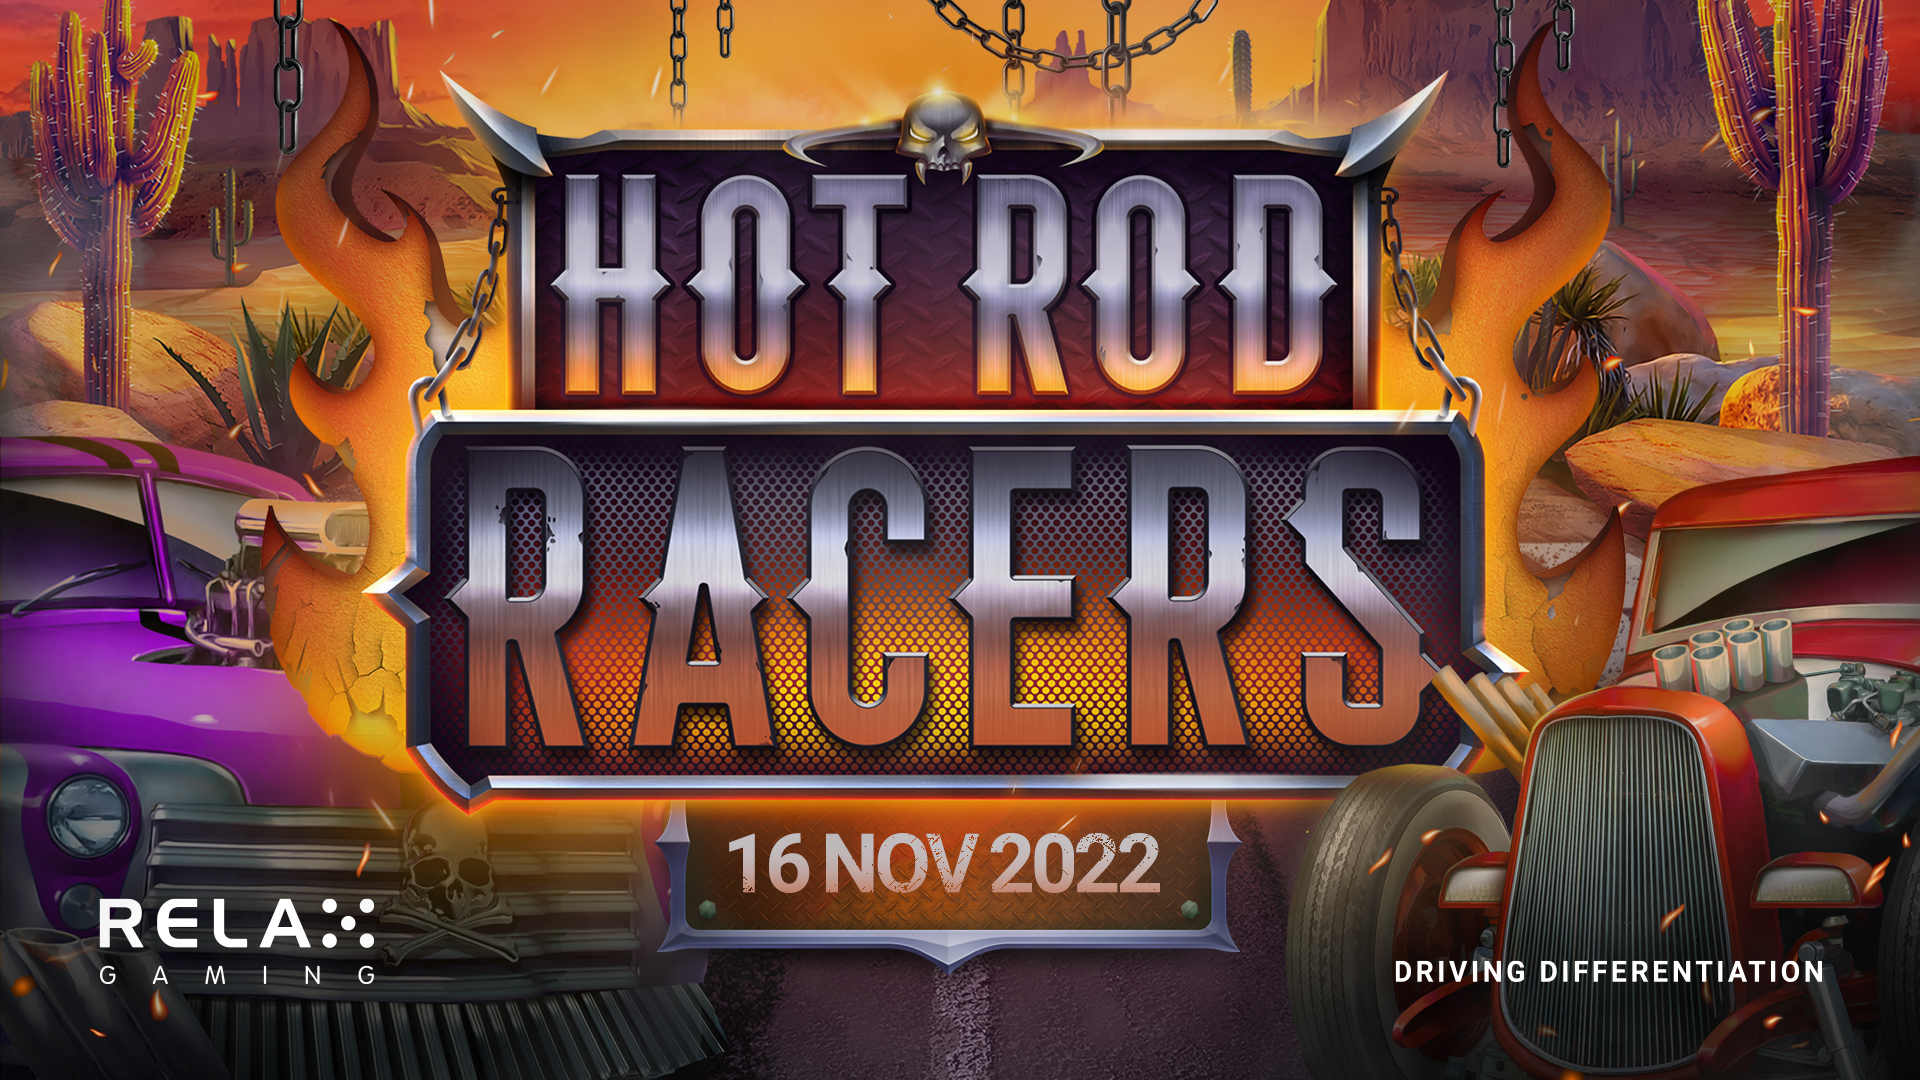 Relax Gaming puts pedal to the metal with Hot Rod Racers Launch